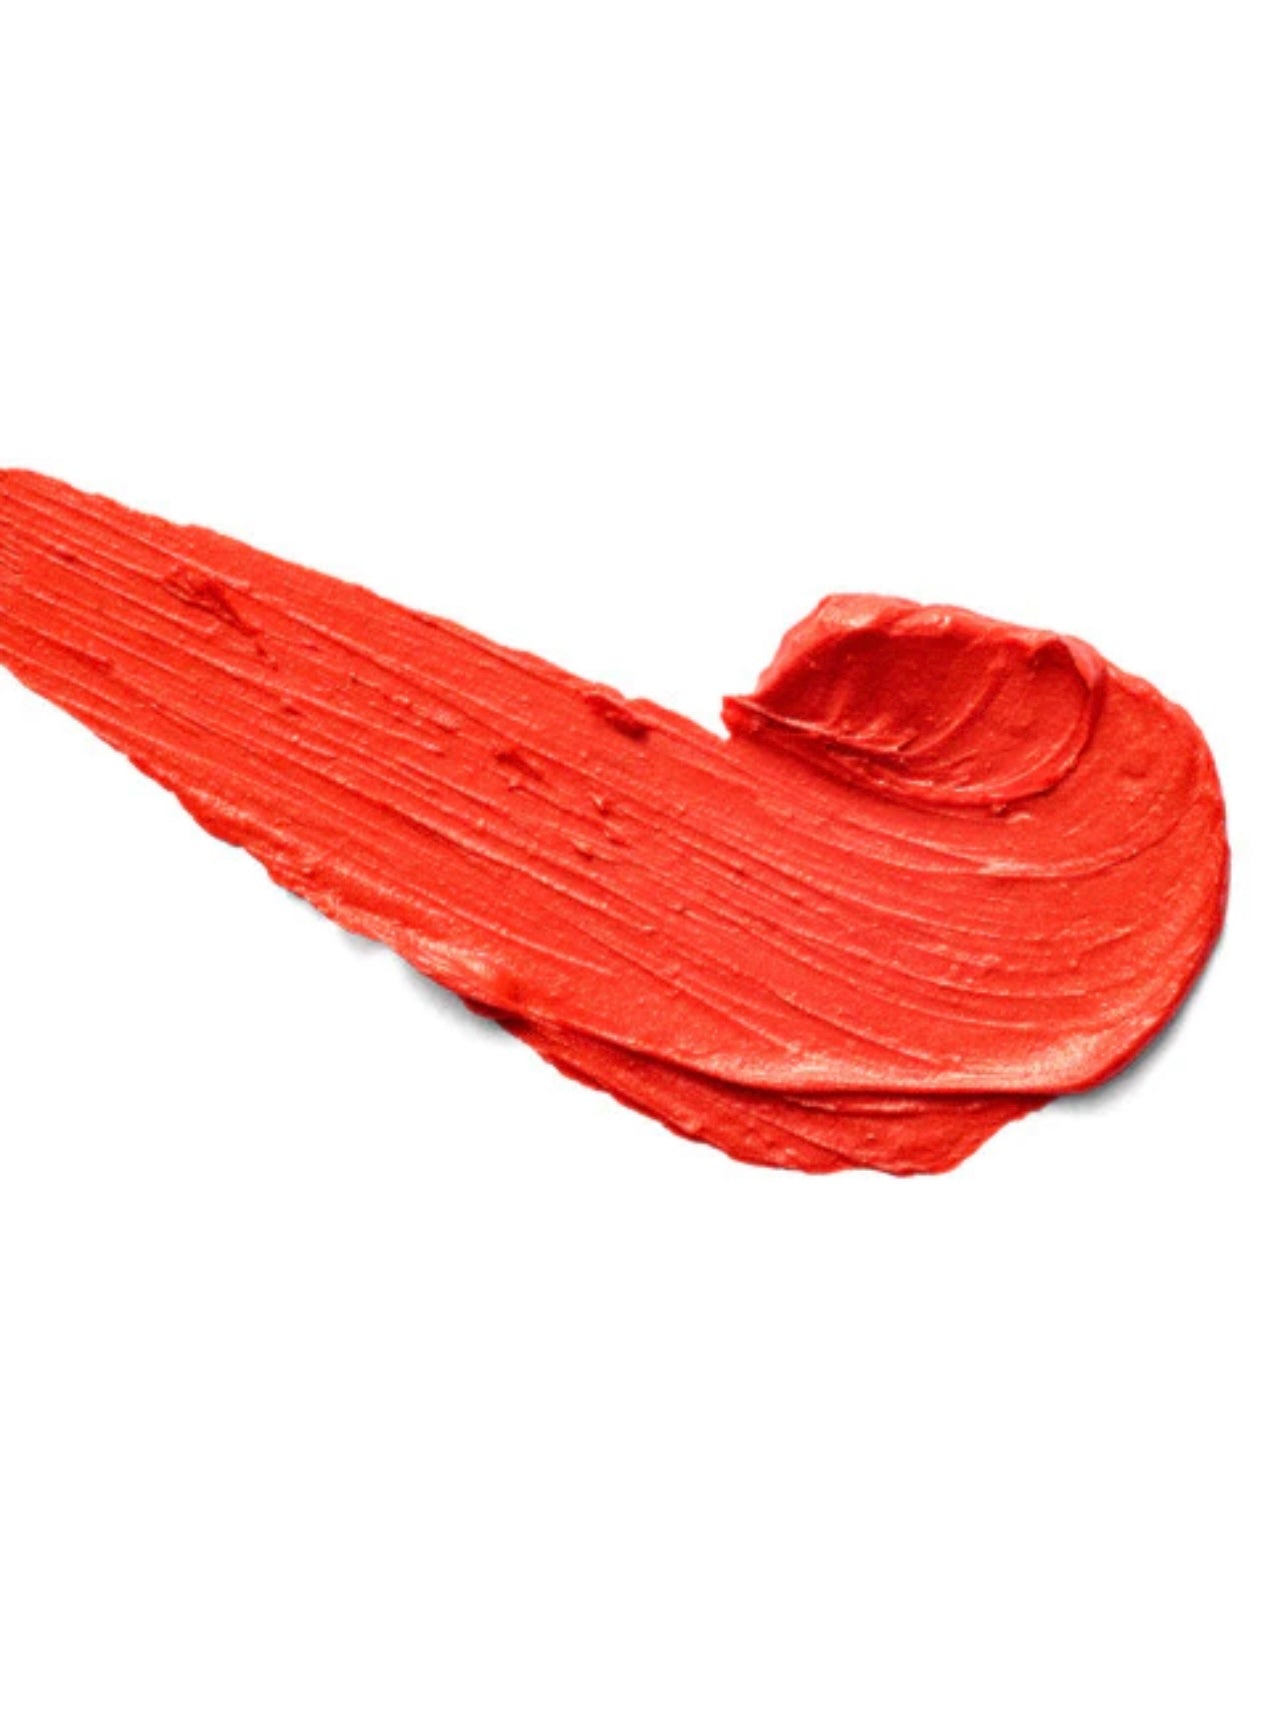 SUZY Lipsticks : Fire Engine Red (Whipped Matte)